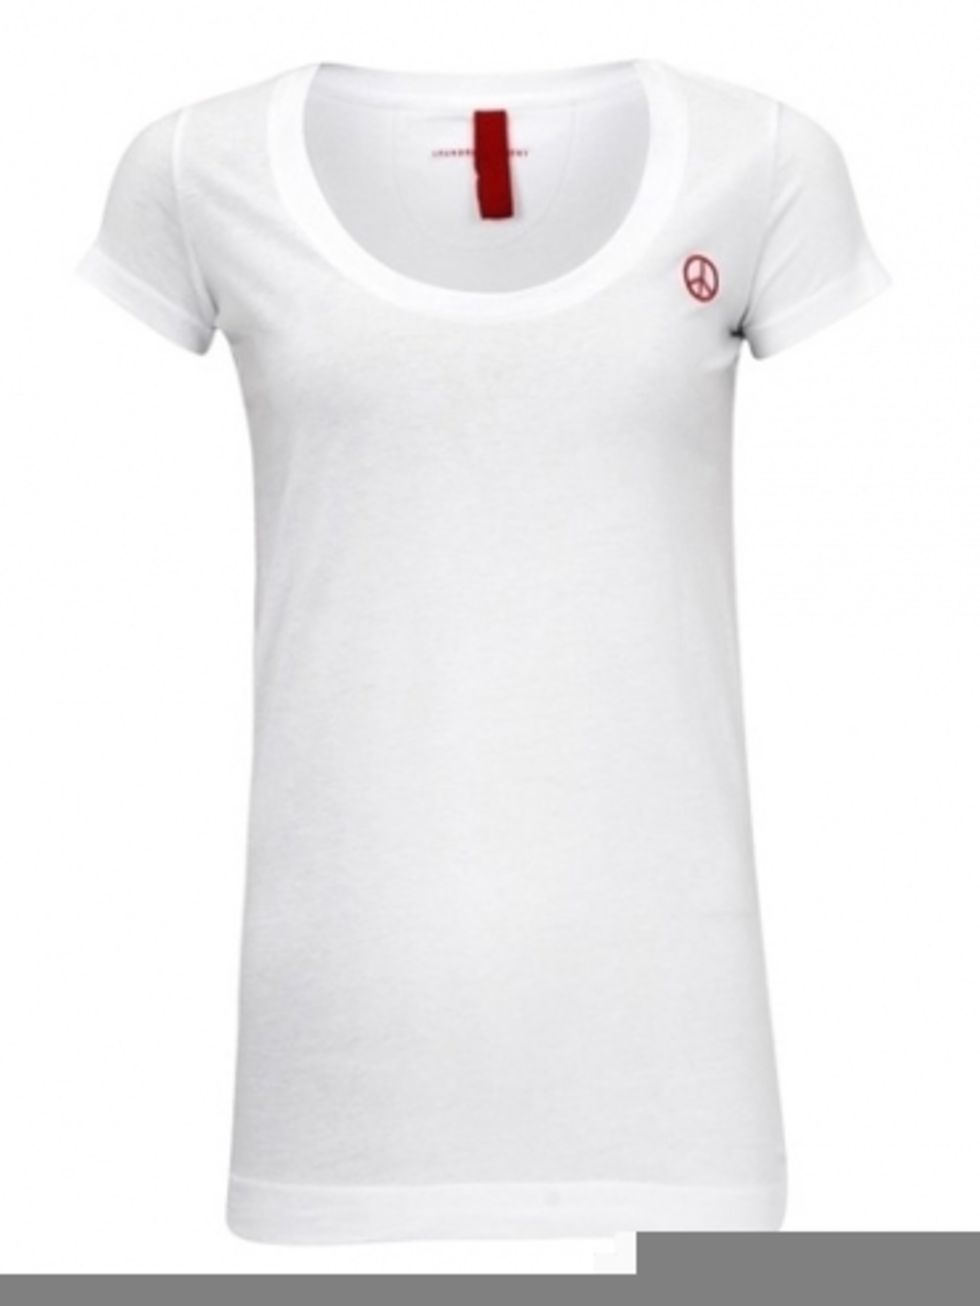 Product, Sleeve, Text, White, Red, Style, Carmine, Pattern, Fashion, Active shirt, 